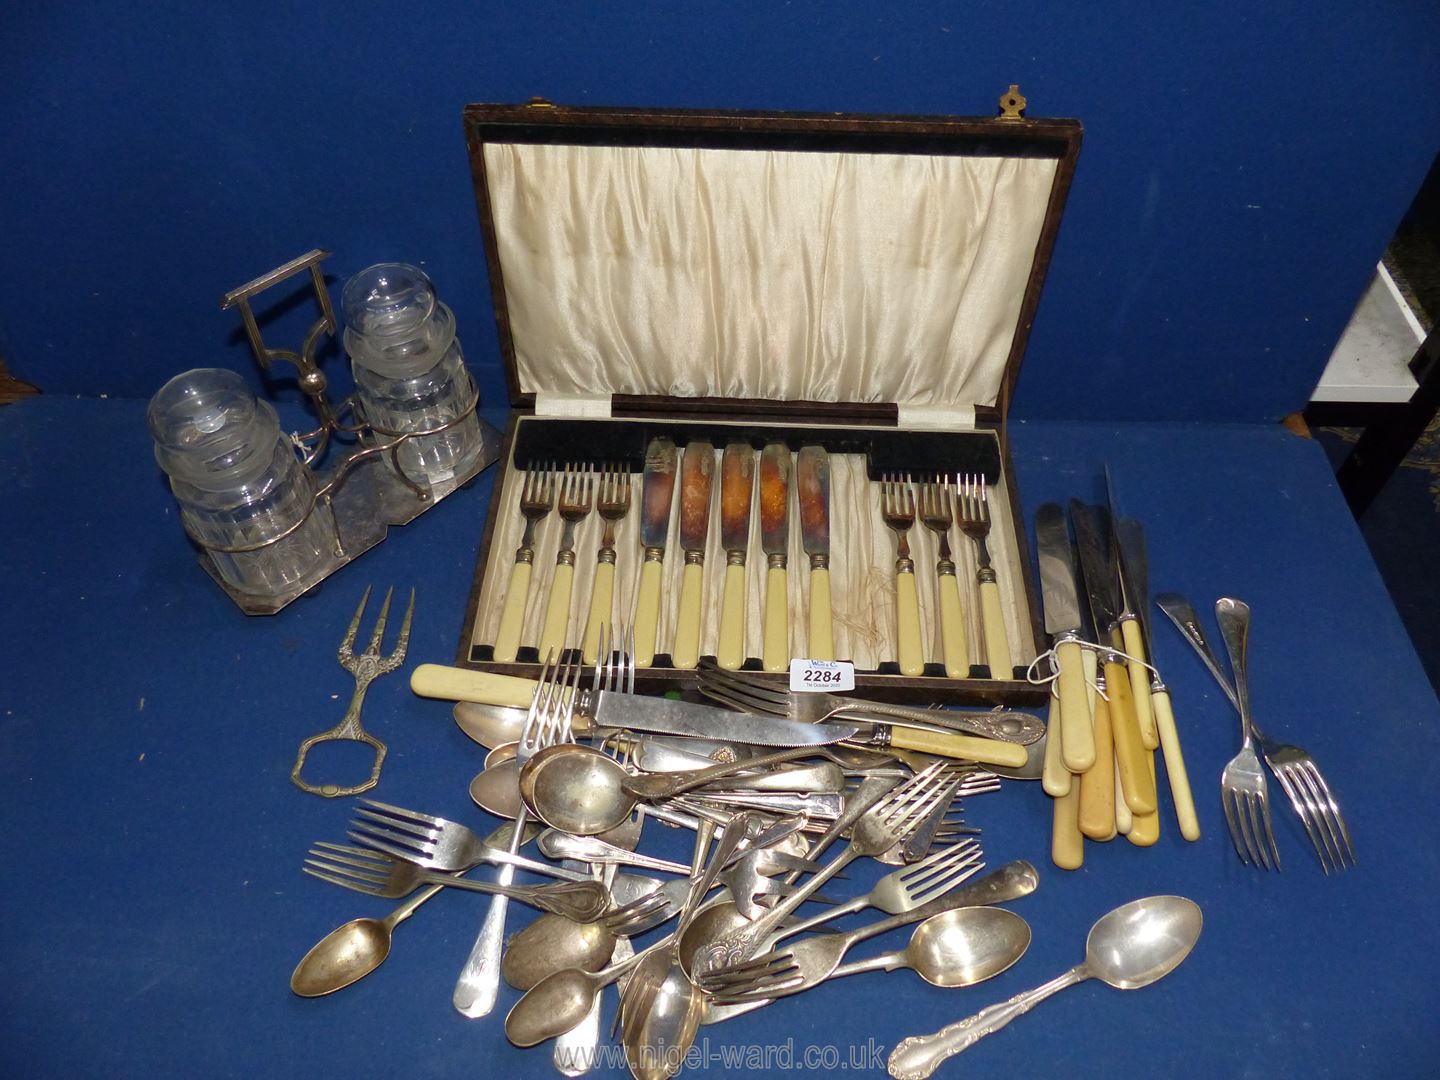 A canteen of fish knives and forks (one knife missing) and a collection of cutlery and a glass